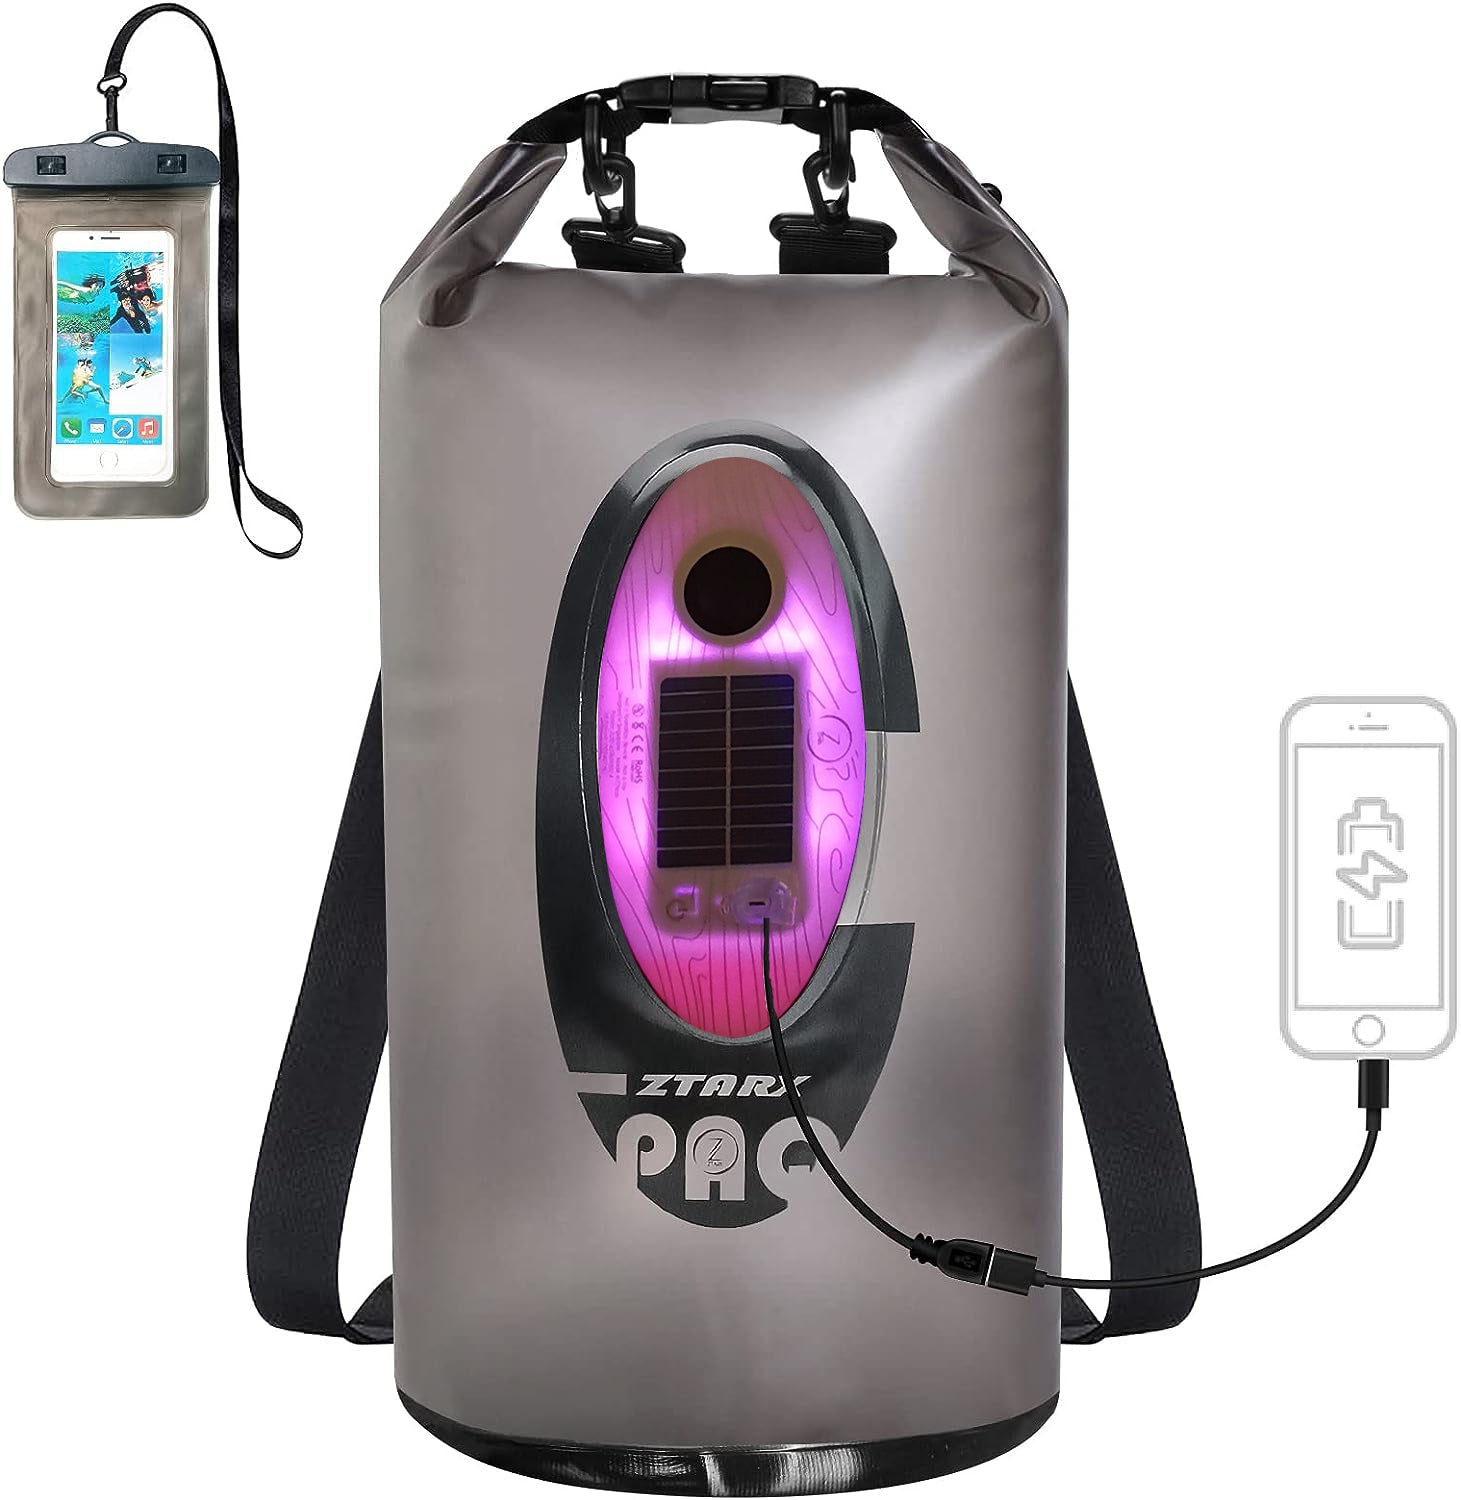 Ztarx S20-PVC-R02 Bluetooth Speaker Dry Bag: Features, Specs, and More